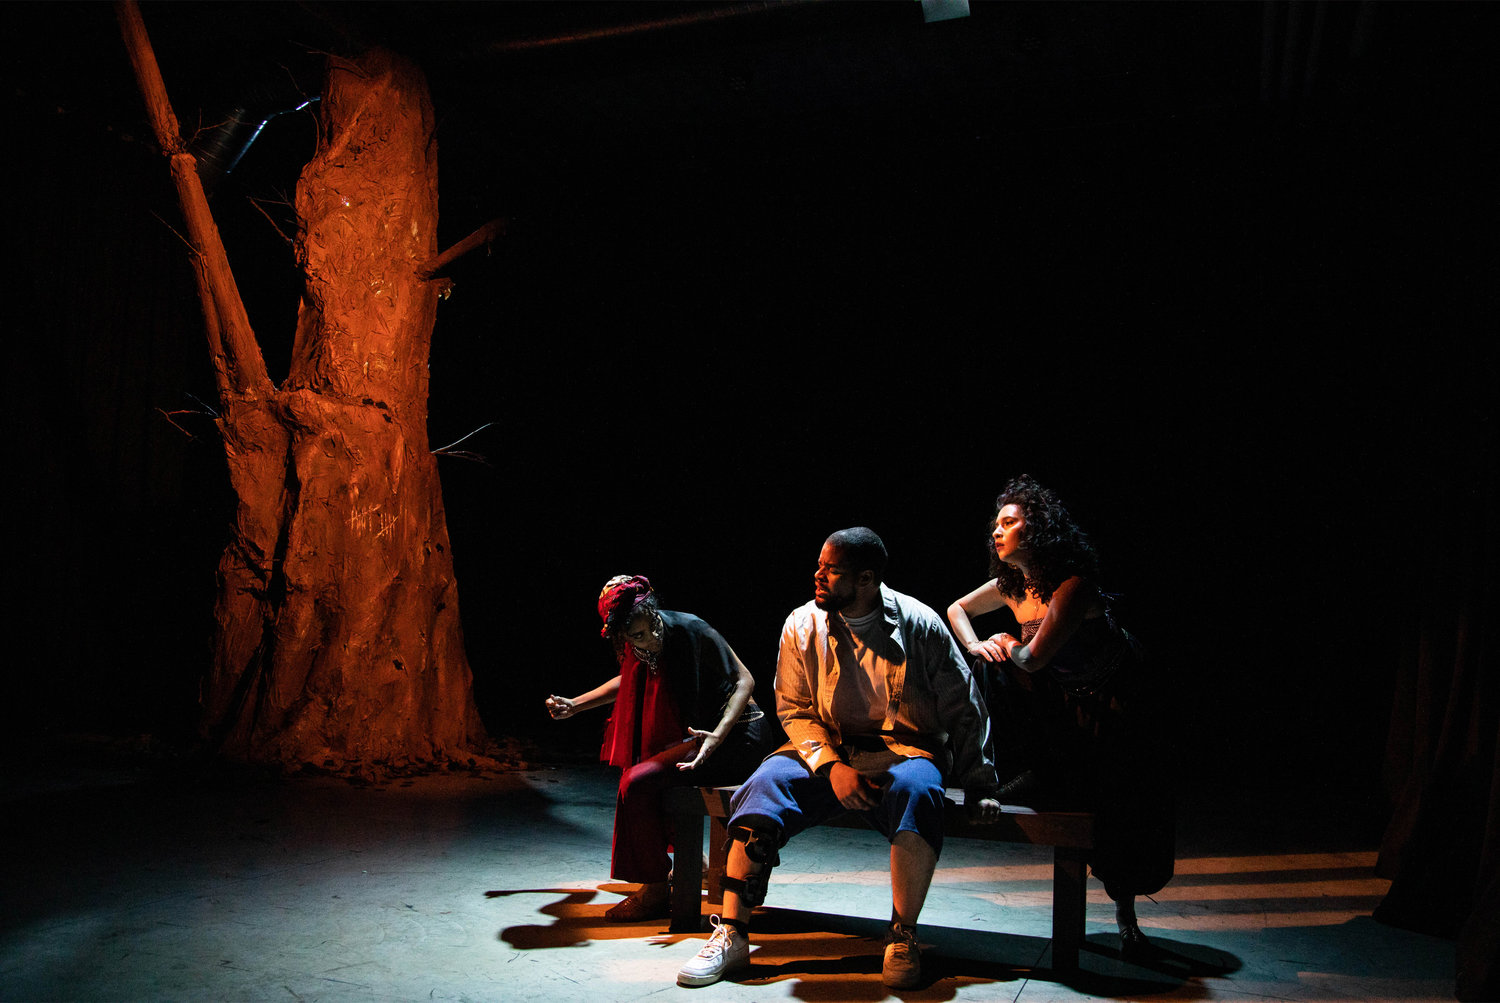 L to R: Jason Quinn, Brianna Rosario, Rudy Cabrera, and  Helena Tafuri (far right) who will play the Singer in We’re Gonna Die. Tafuri was last seen in Wilbury’s production of Silhouette of a Silhouette, Hype Man: A Break Beat Play, and Futurity